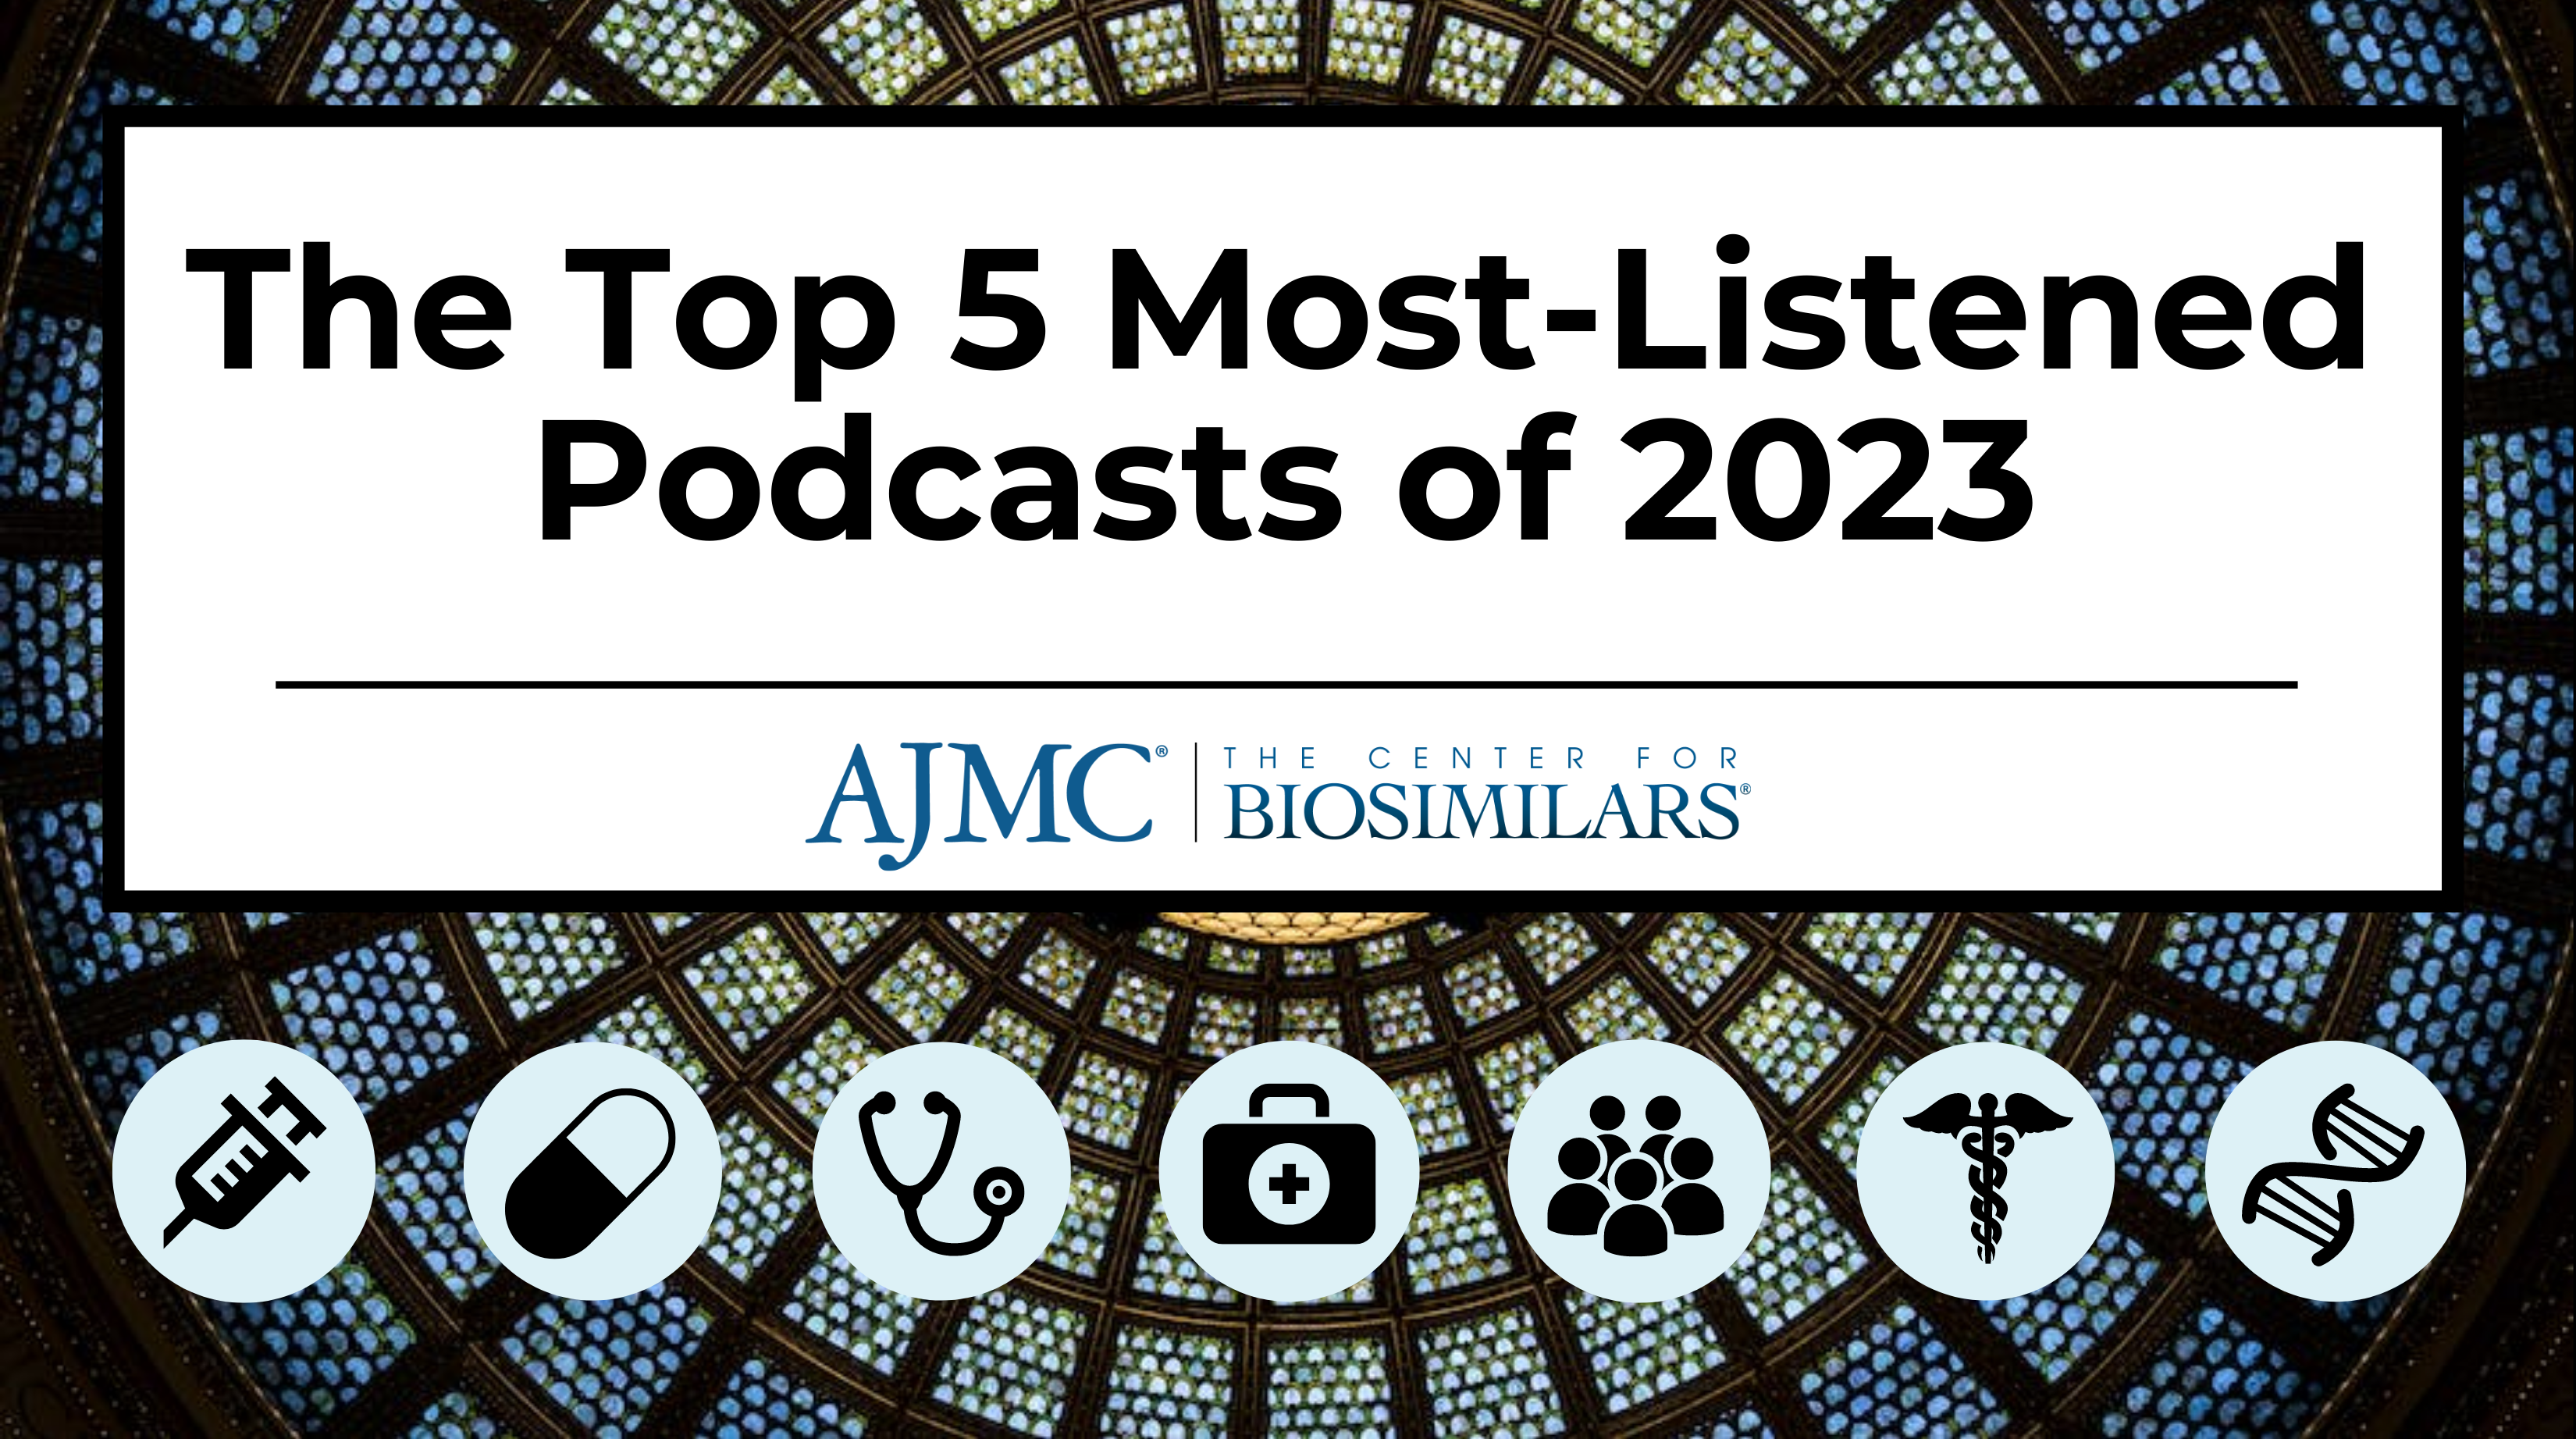 The Top 5 Most-Listened Podcasts of 2023